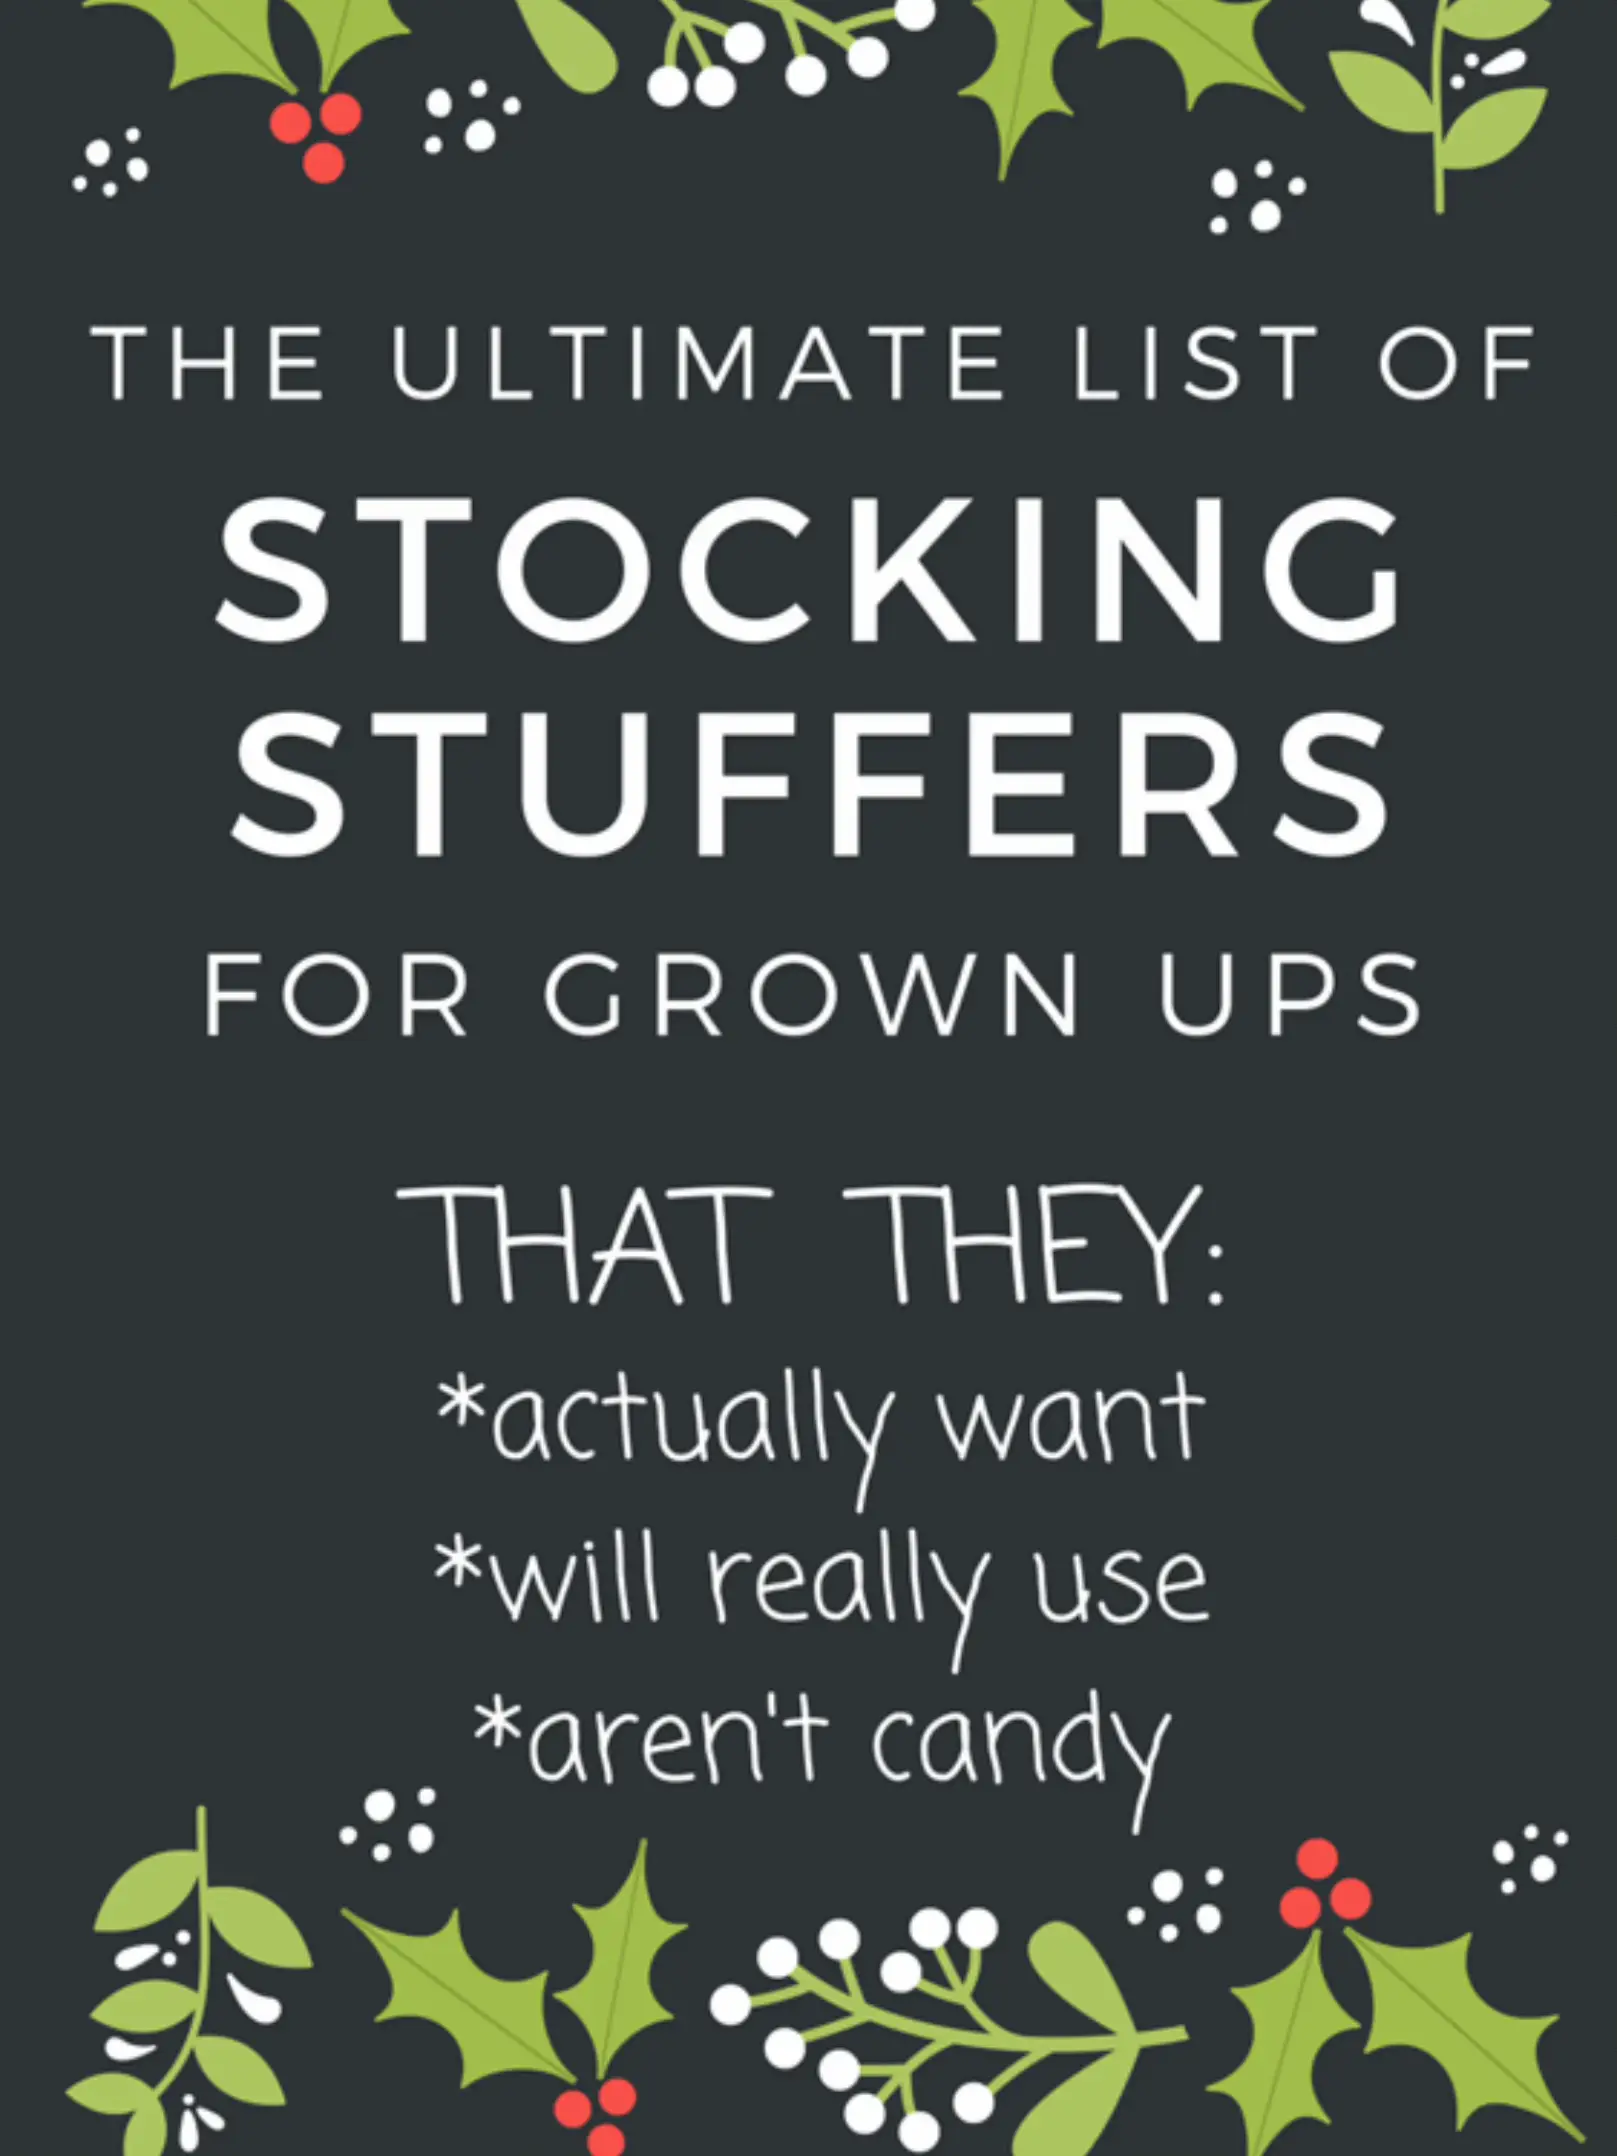 Cute Stocking Stuffers (That Aren't Candy!)